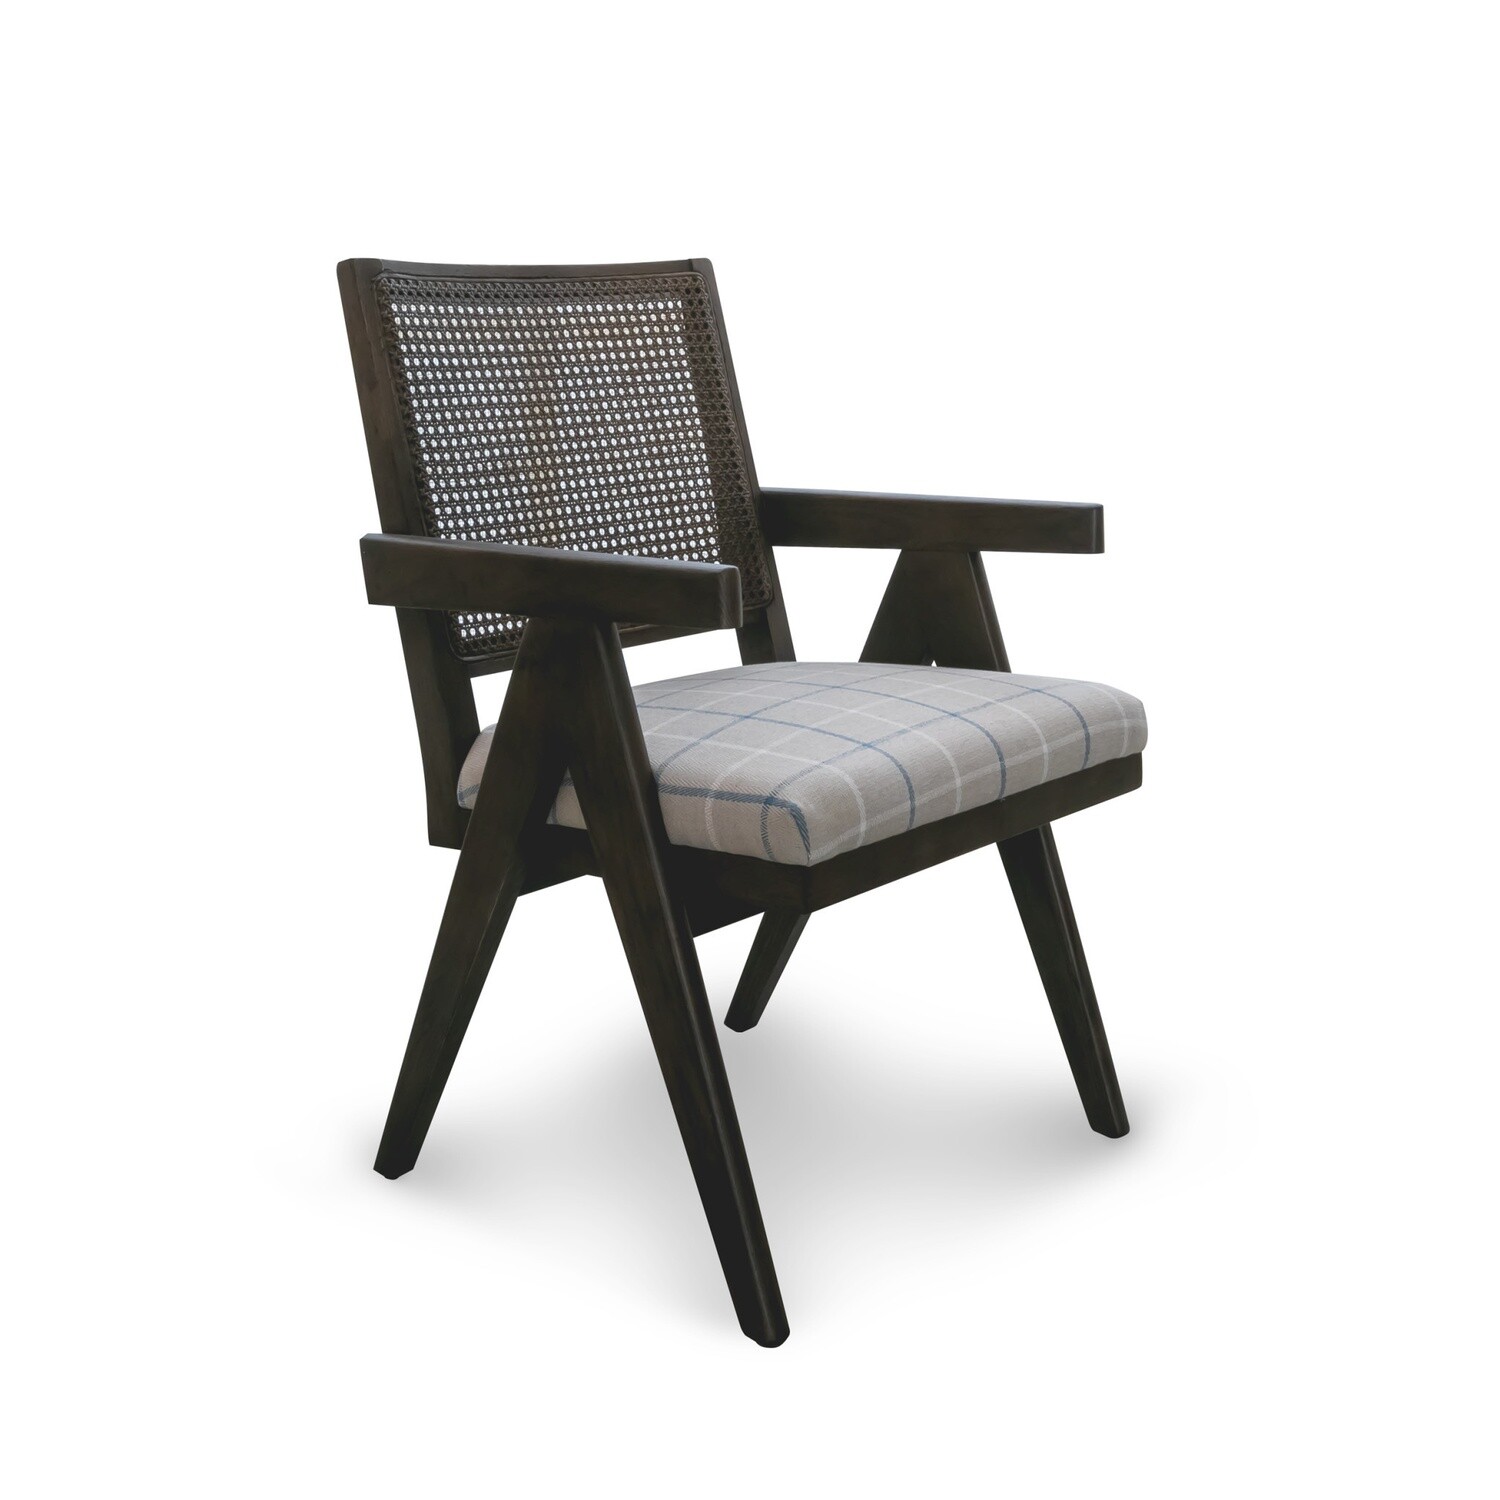 Chair - Cottage Casual - Blue/Beige Check